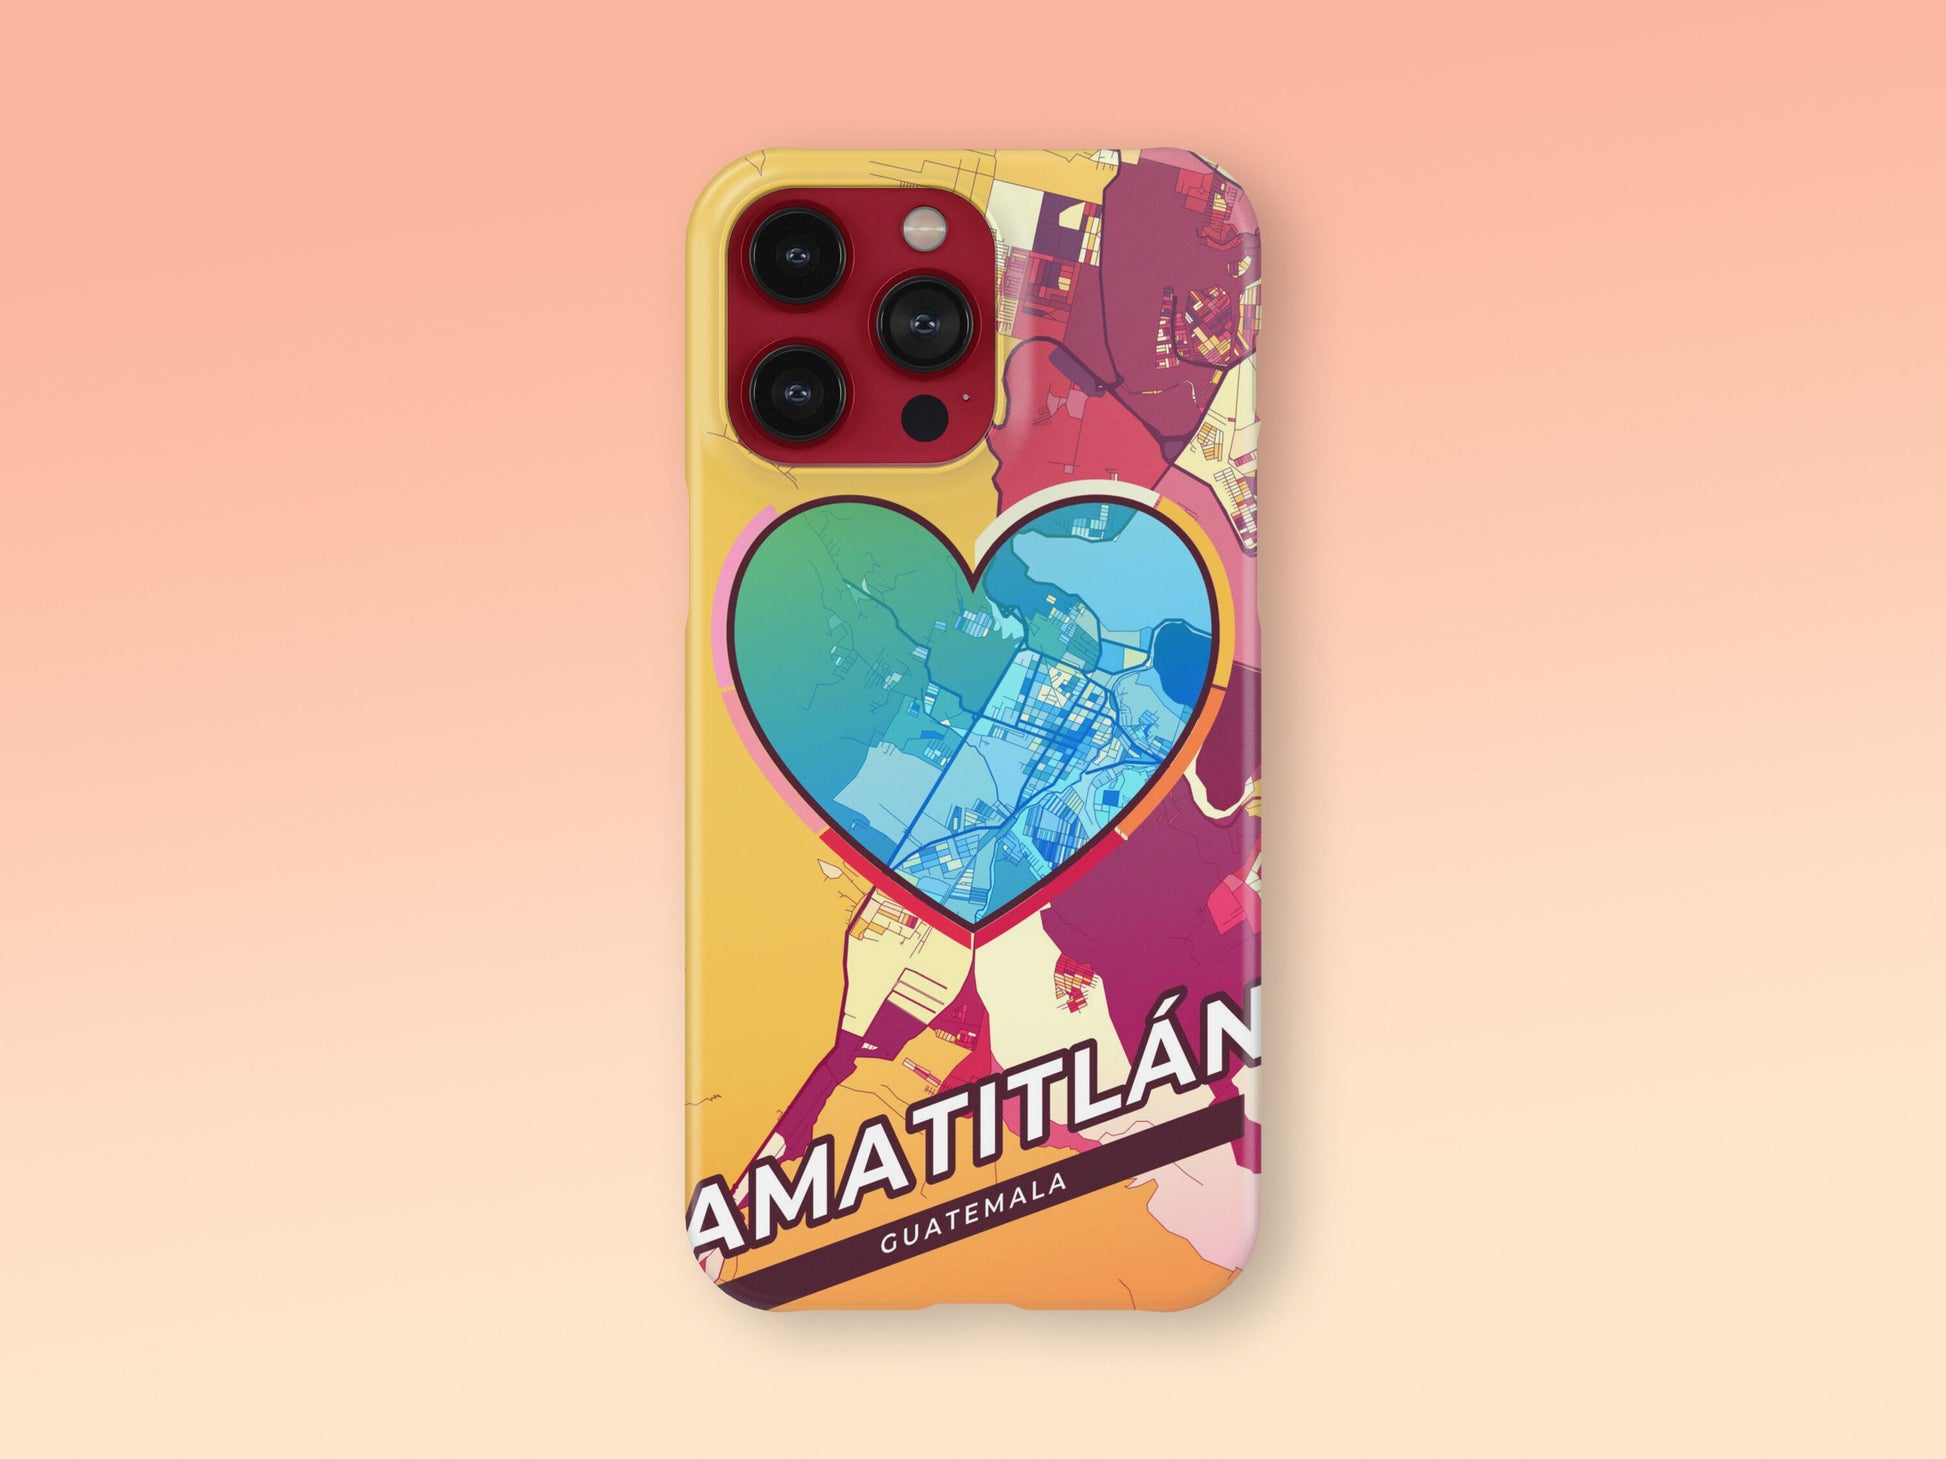 Amatitlán Guatemala slim phone case with colorful icon. Birthday, wedding or housewarming gift. Couple match cases. 2